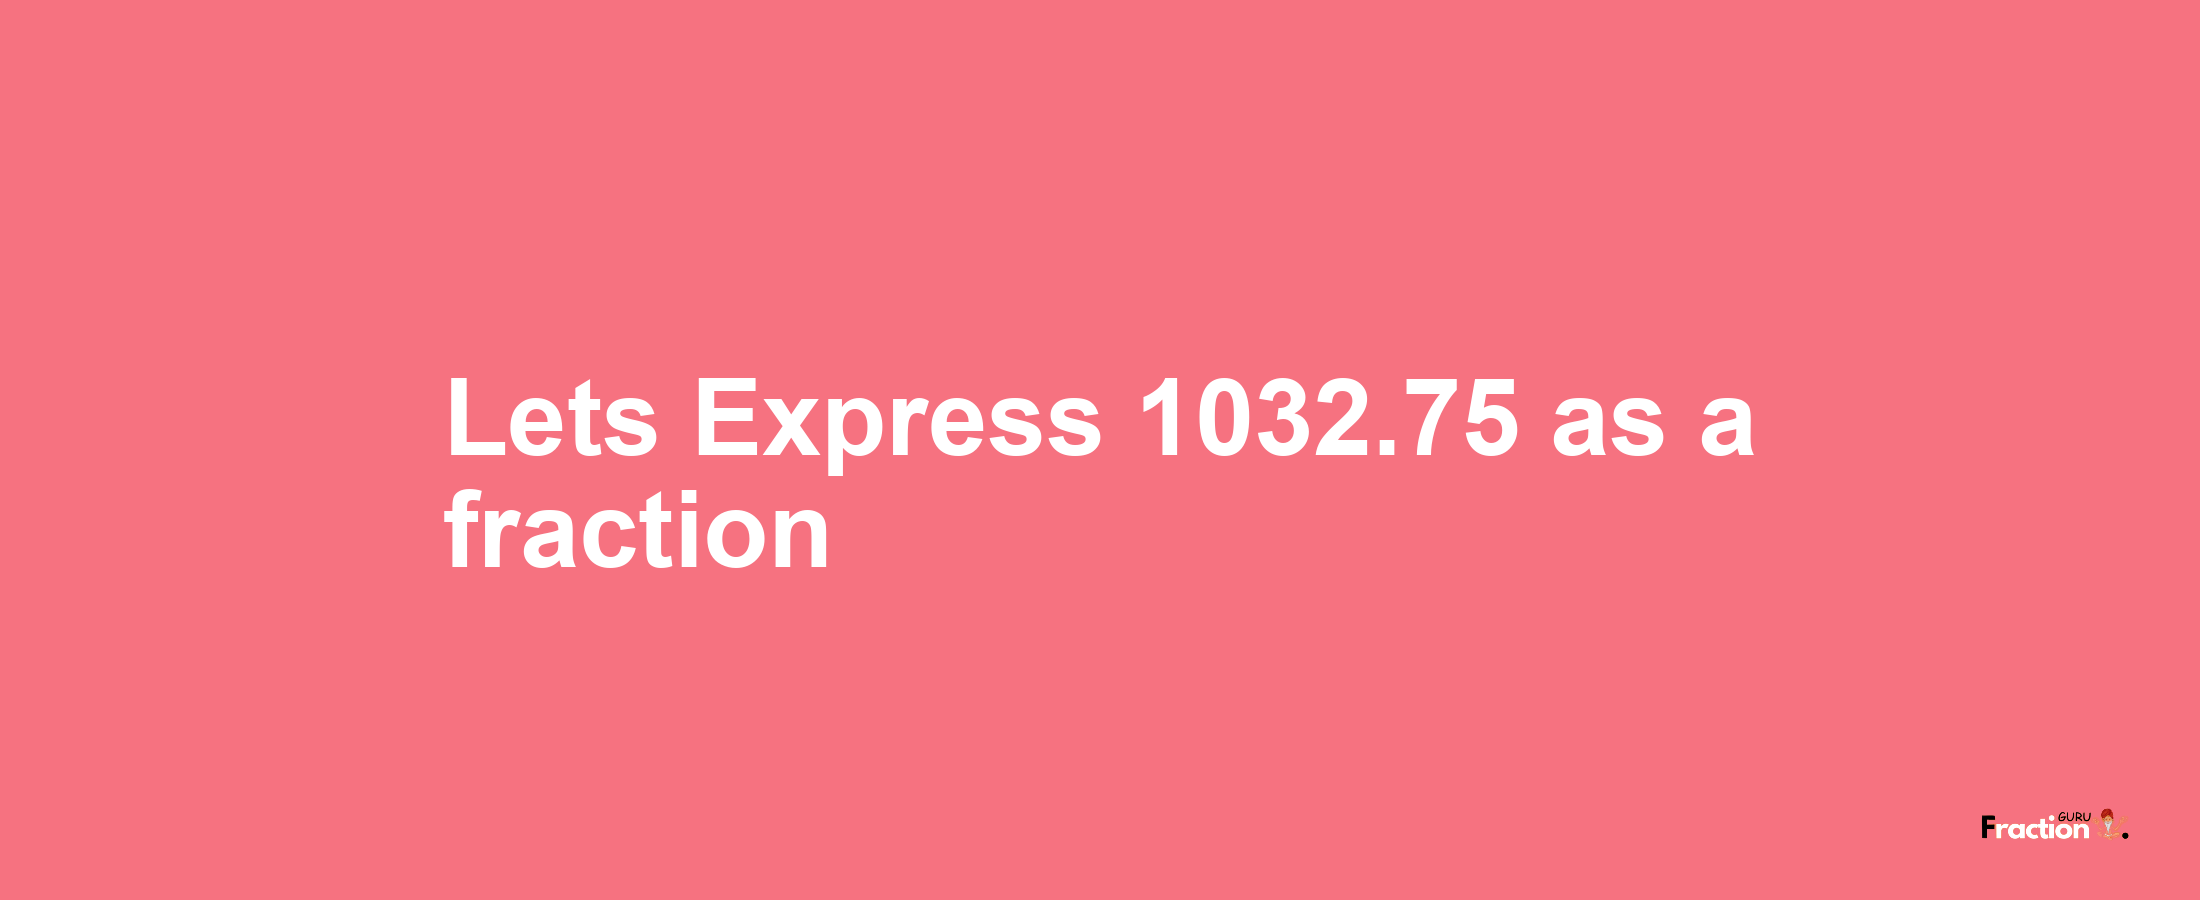 Lets Express 1032.75 as afraction